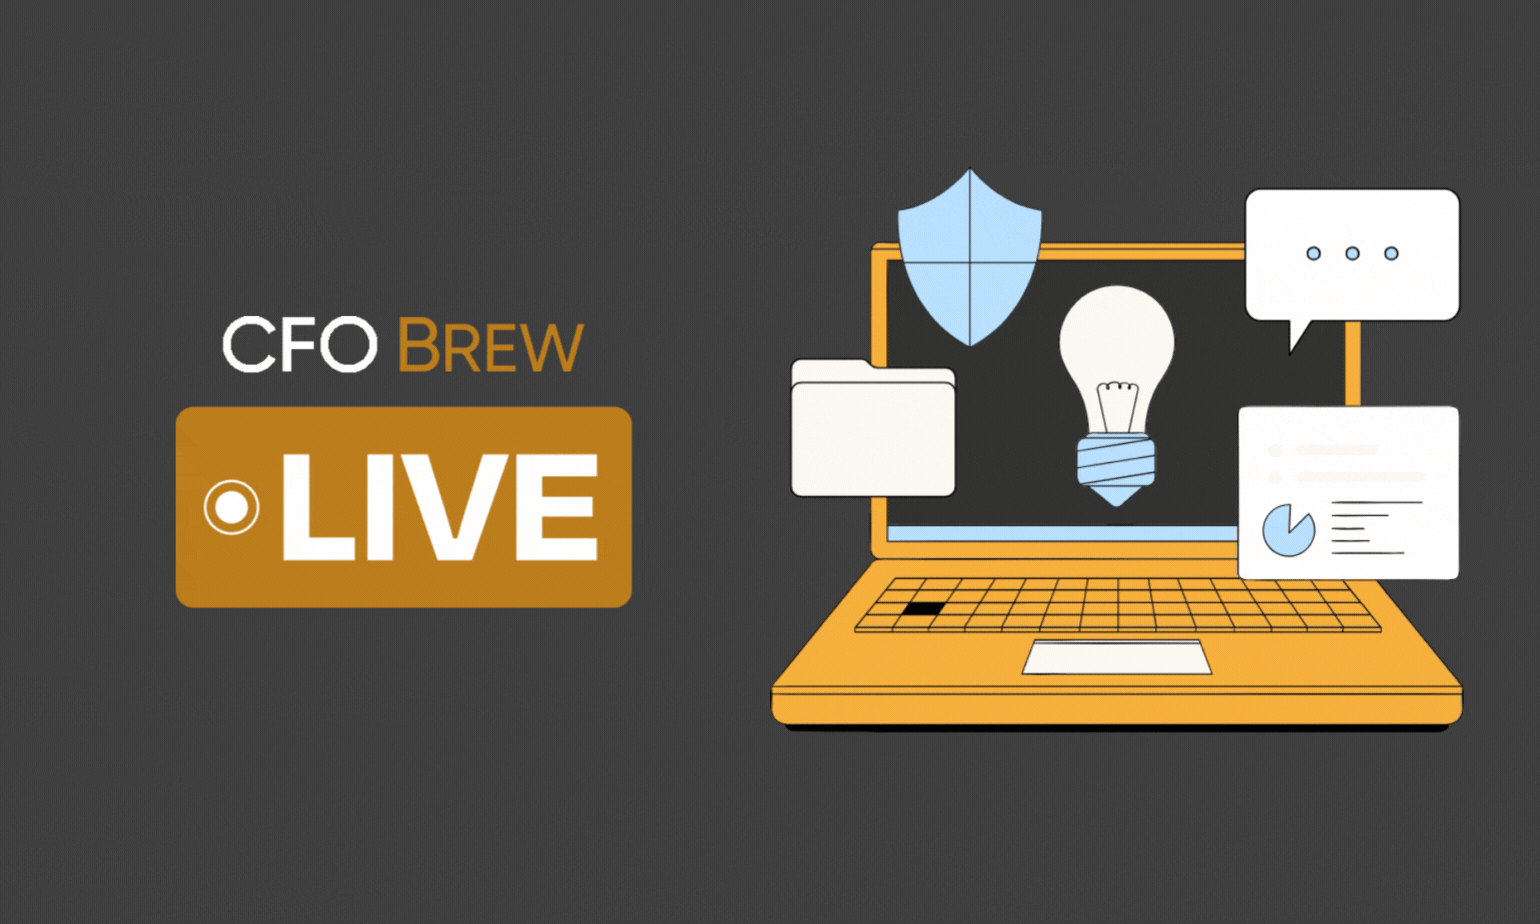 CFO Brew Live logo next to an animated illustration of a laptop with they keys typing surrounded by icons